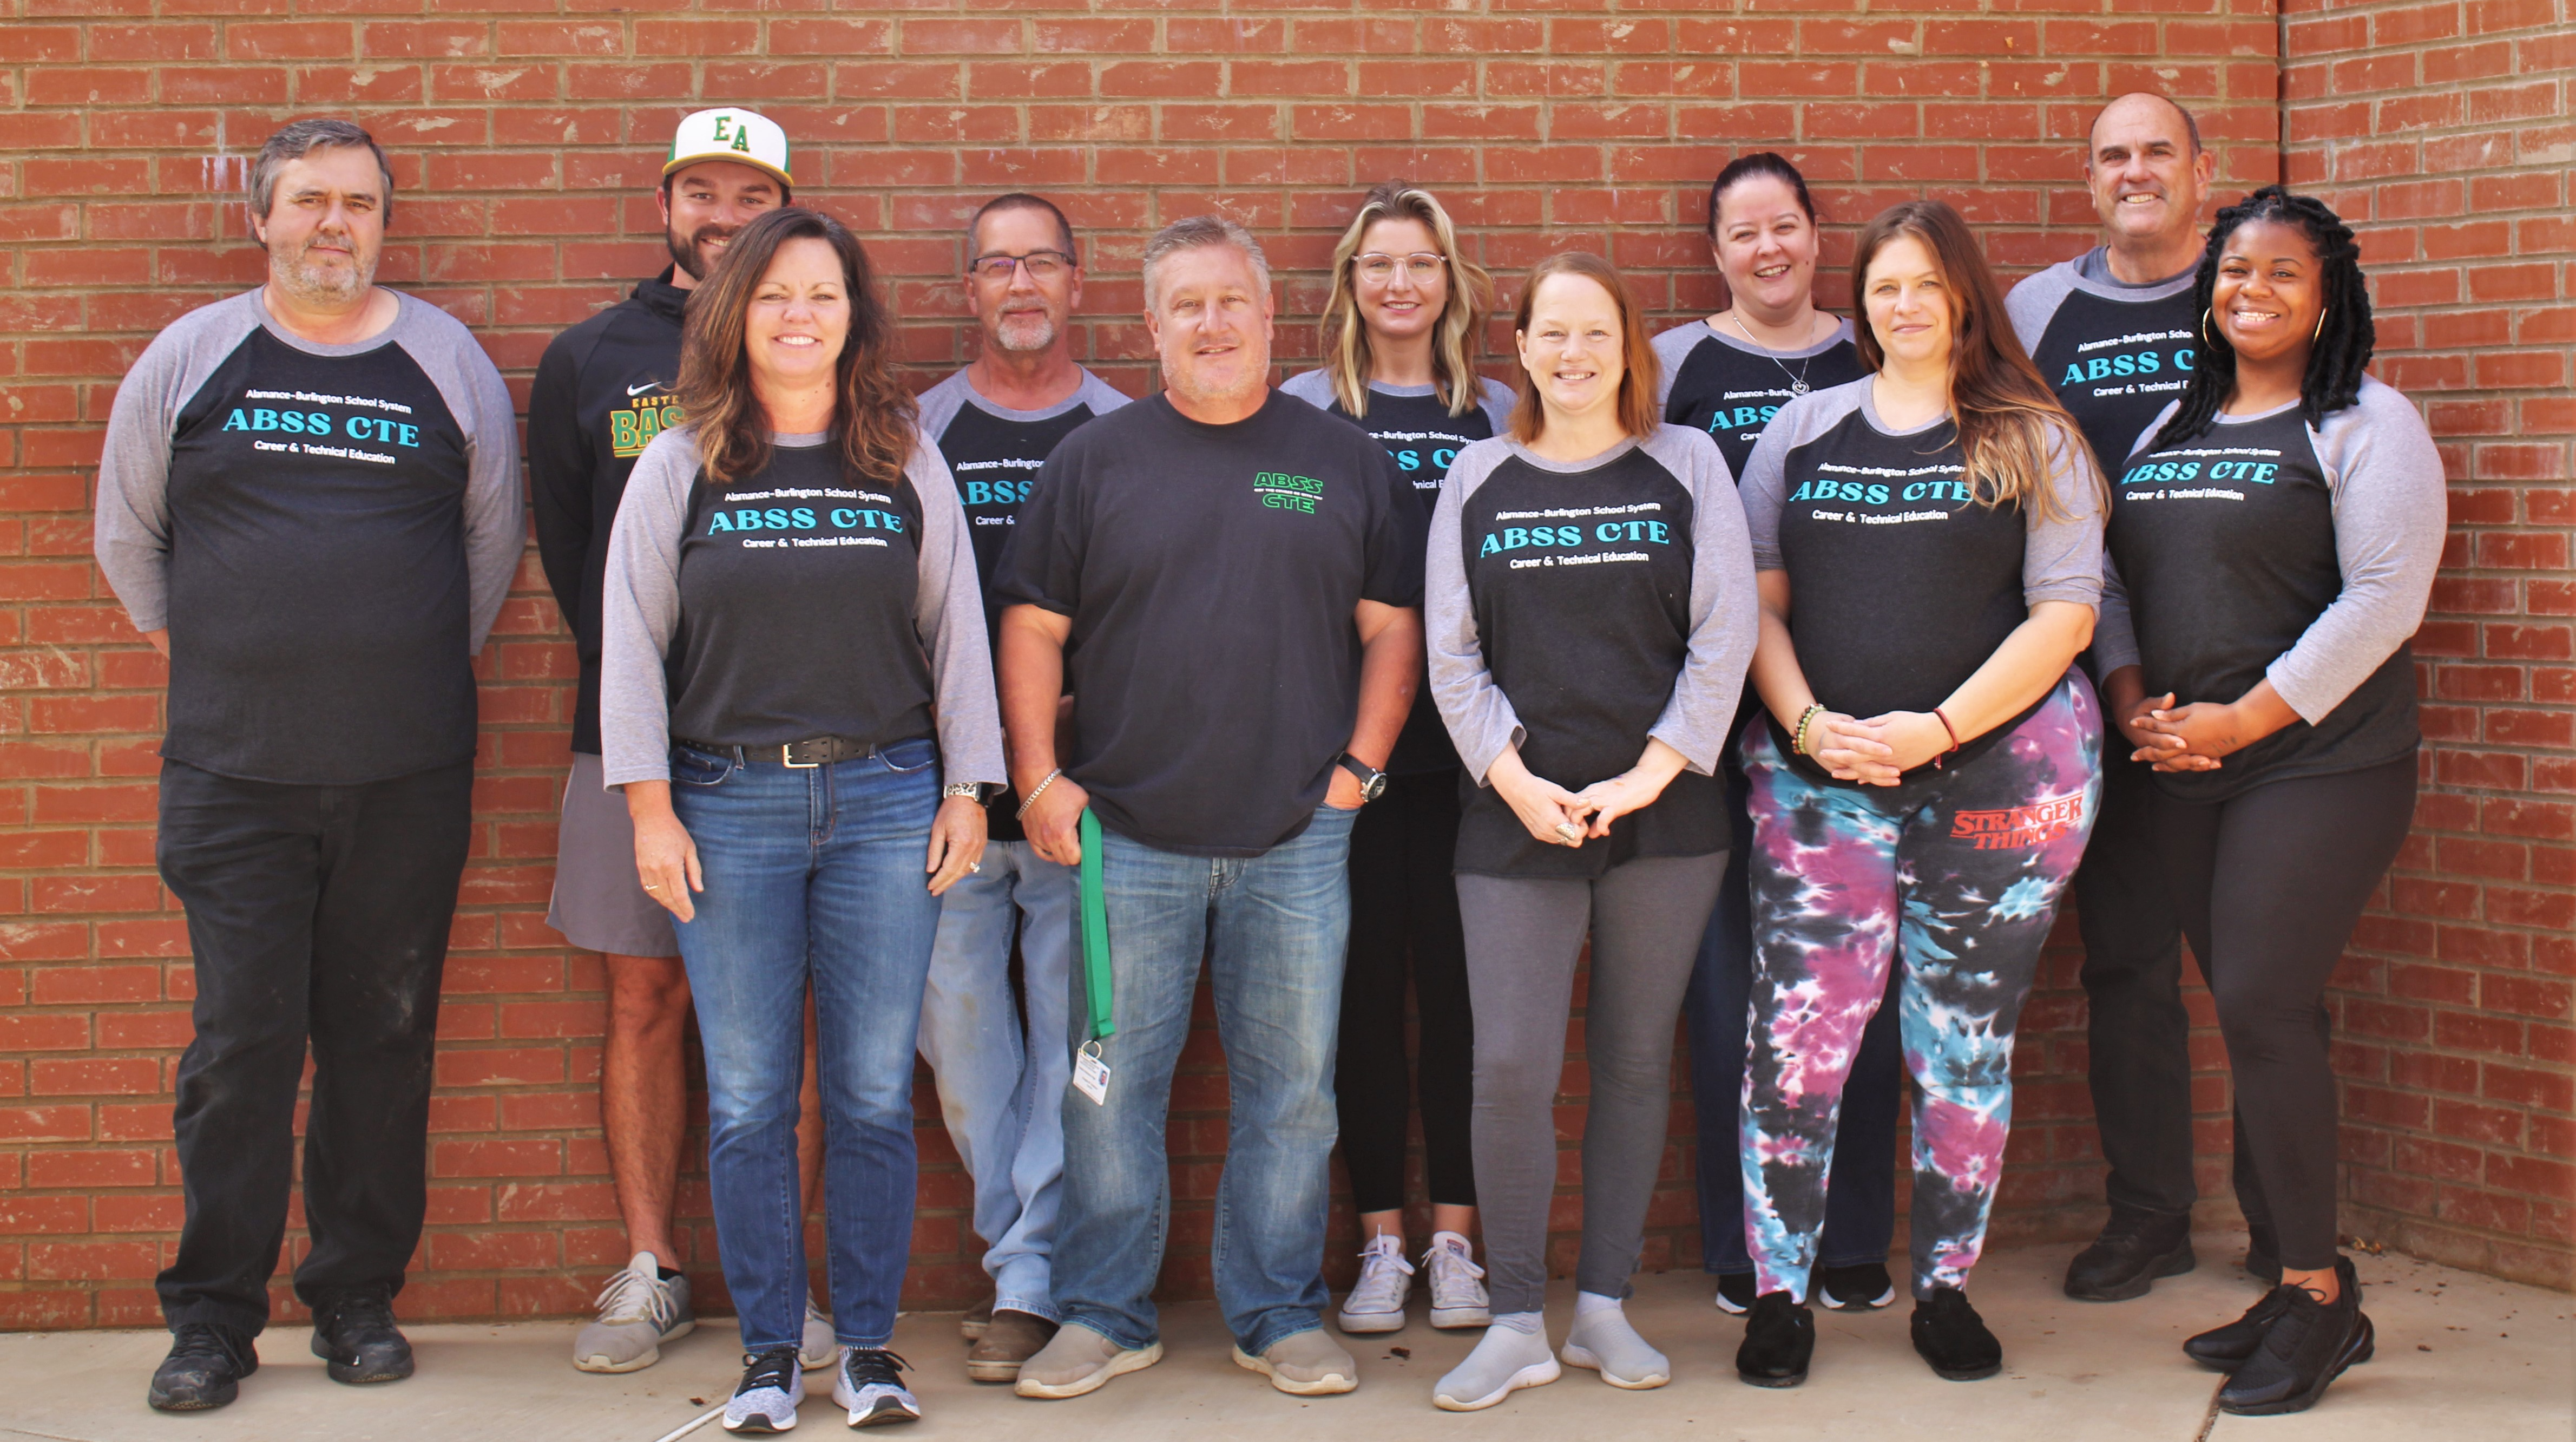 CTE Teachers standing together in two rows against a brick wall.